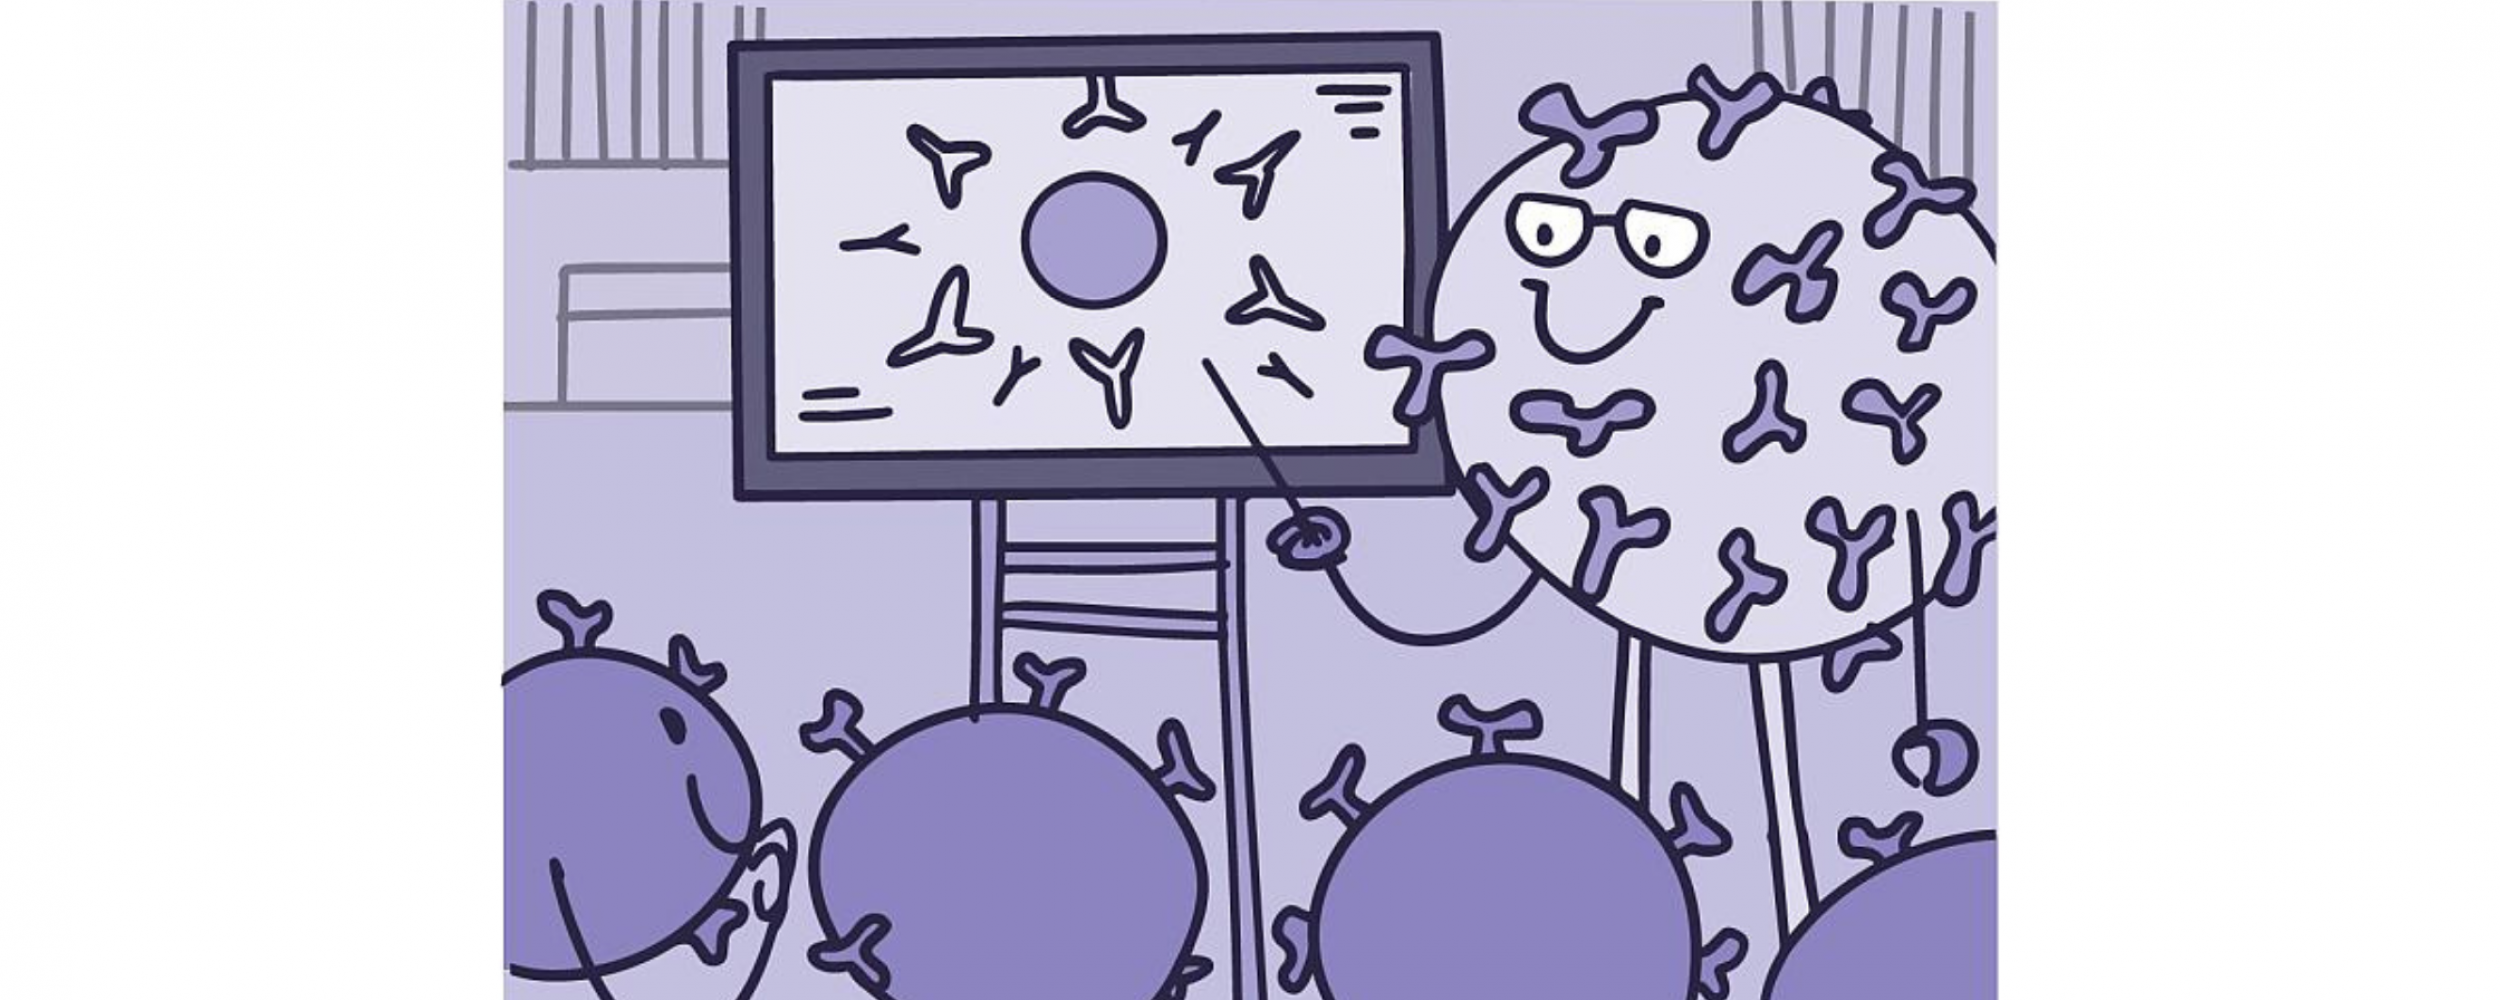 Illustration of immune cells being taught by a teacher in a classroom